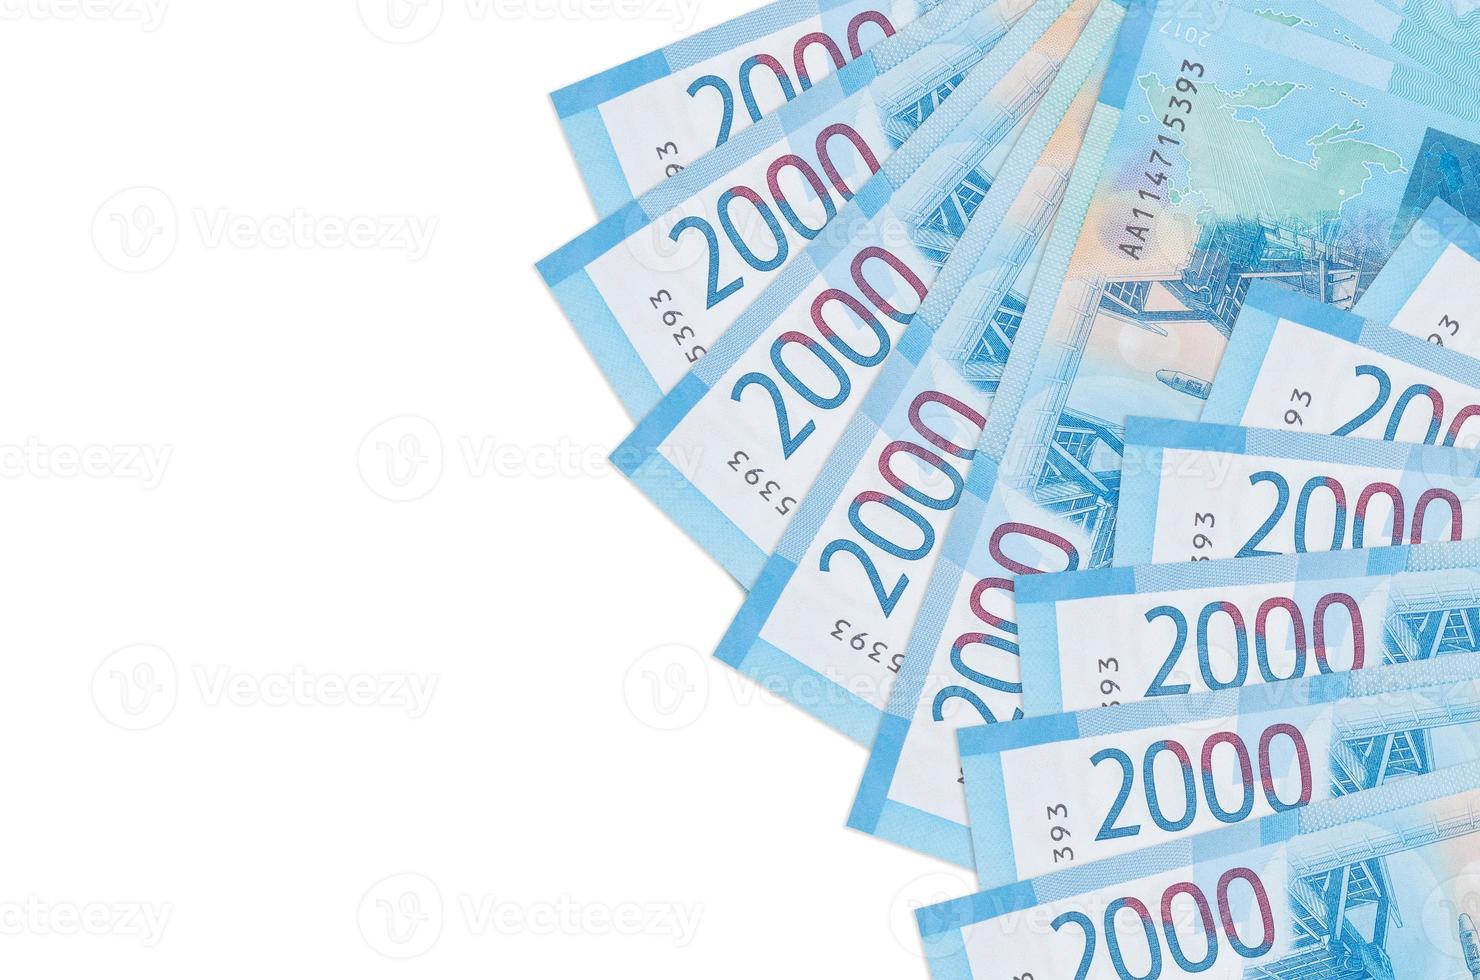 2000 russian rubles bills lies isolated on white background with copy space. Rich life conceptual background photo